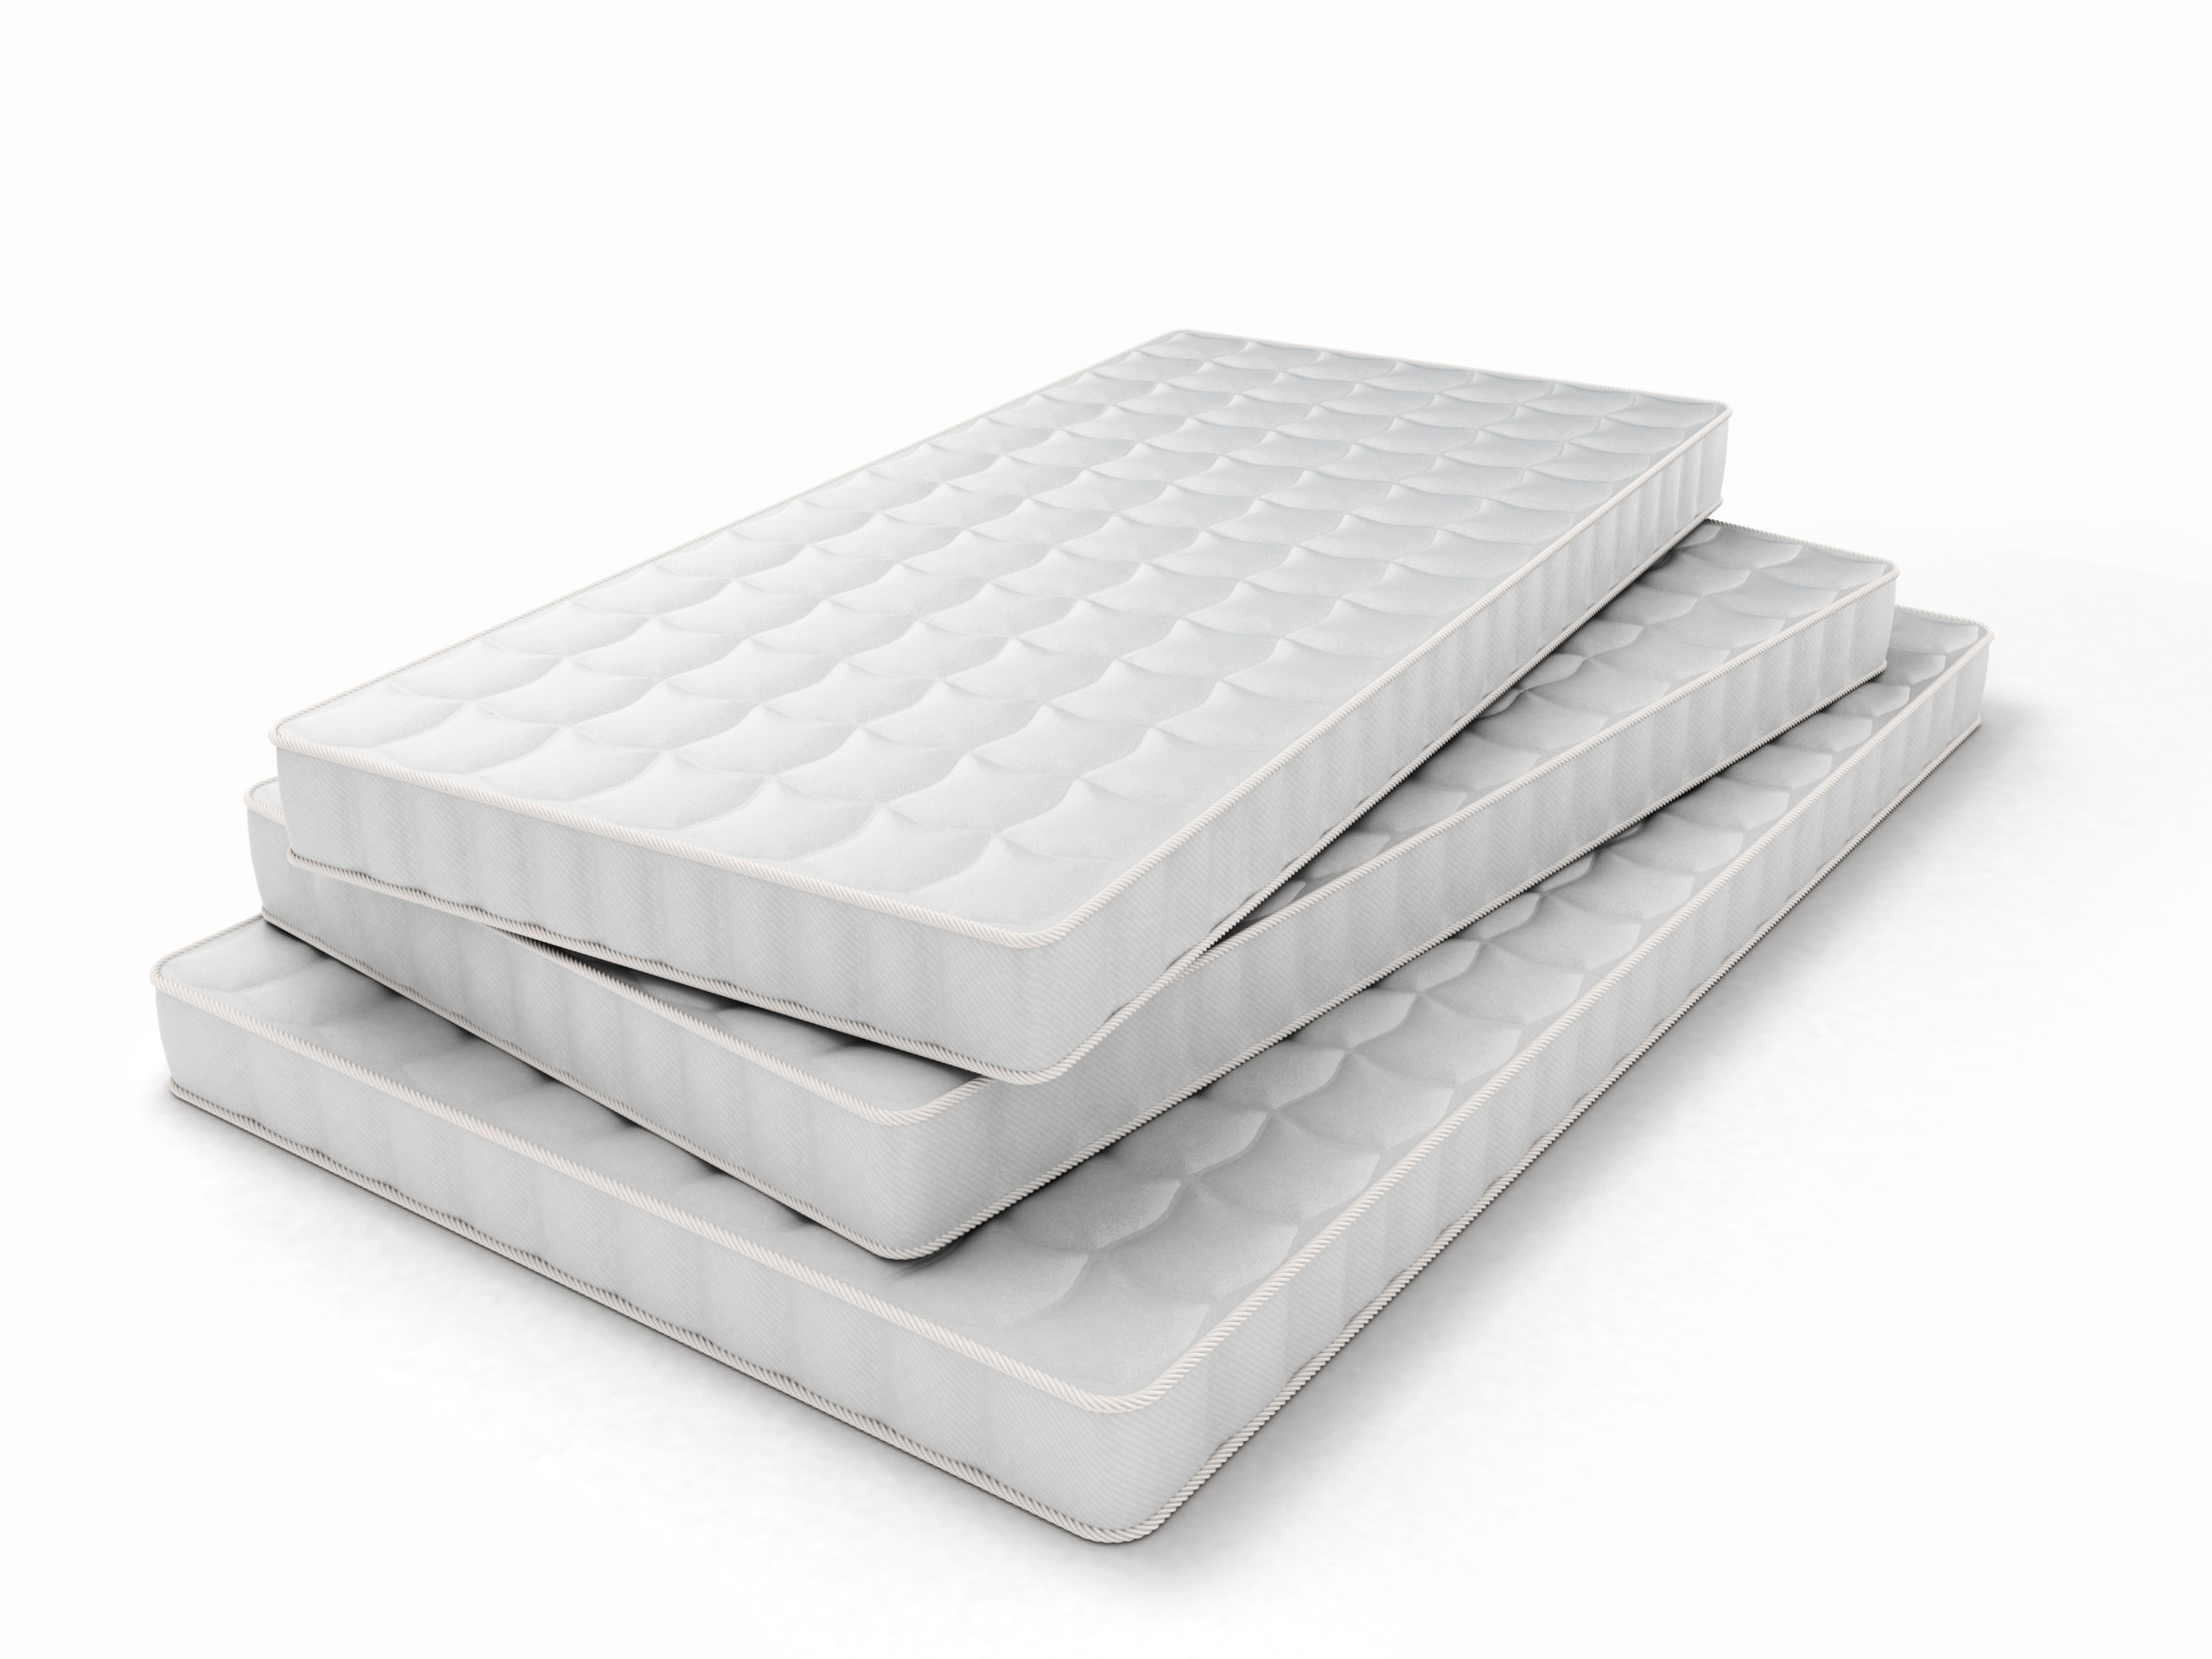 Different Sizes Mattresses Stack